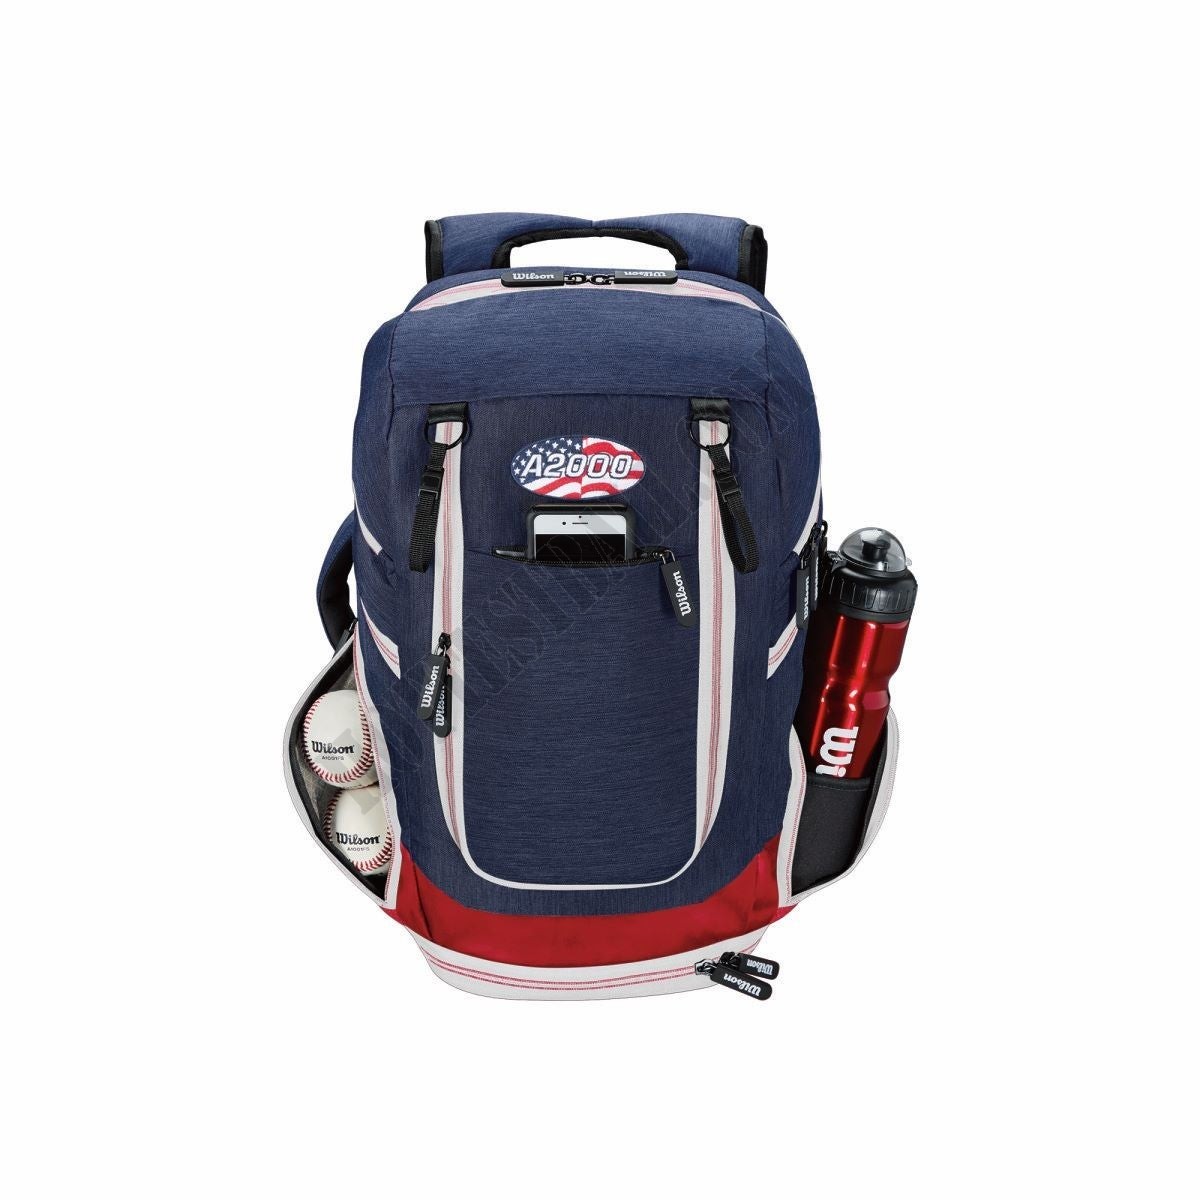 Wilson A2000 Backpack - Wilson Discount Store - -20